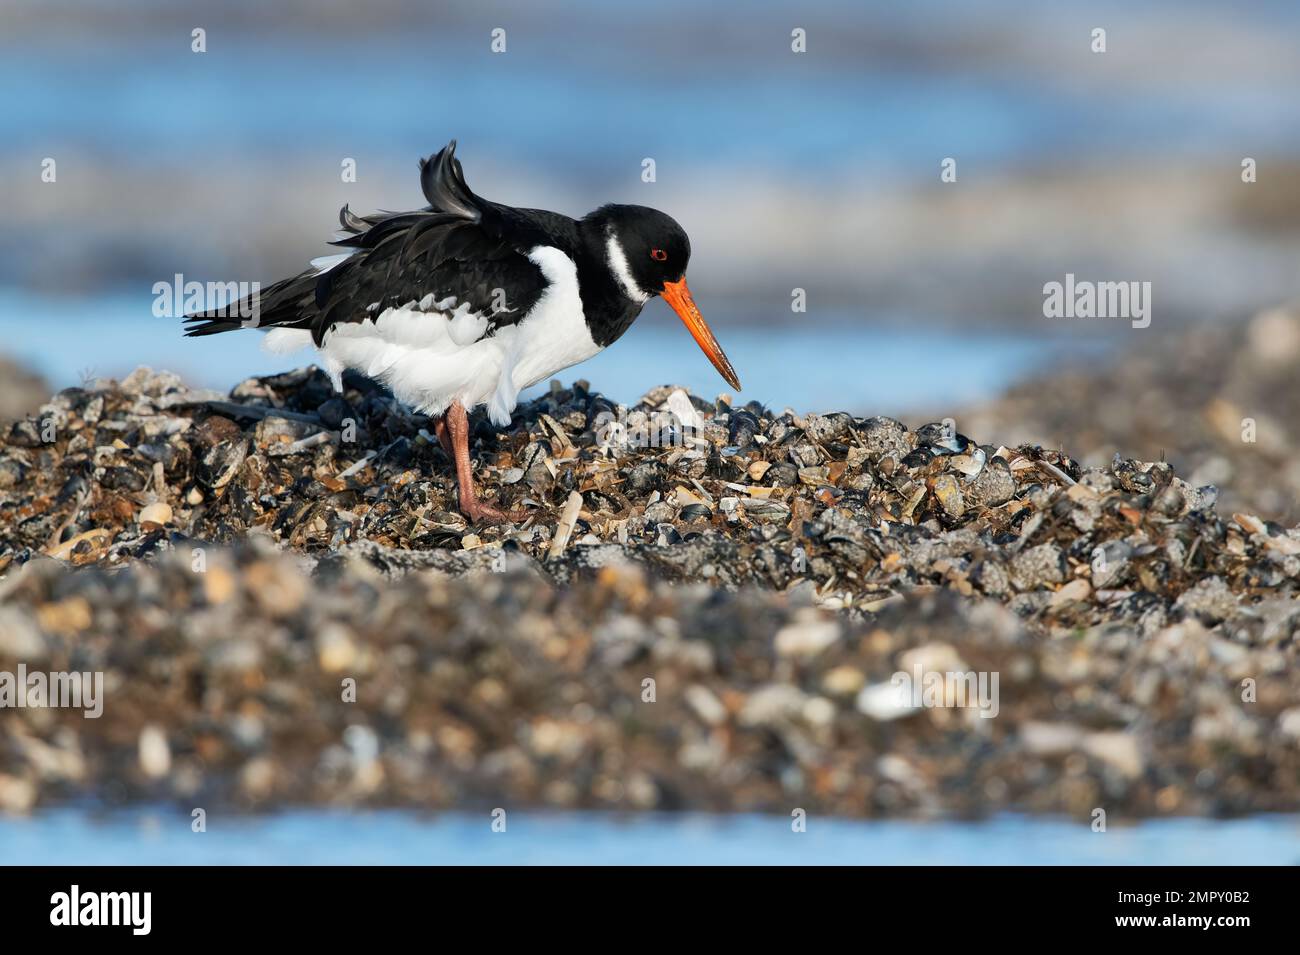 Oystercatcher (Haematopus ostralegus) searching for food in mussel beds Stock Photo